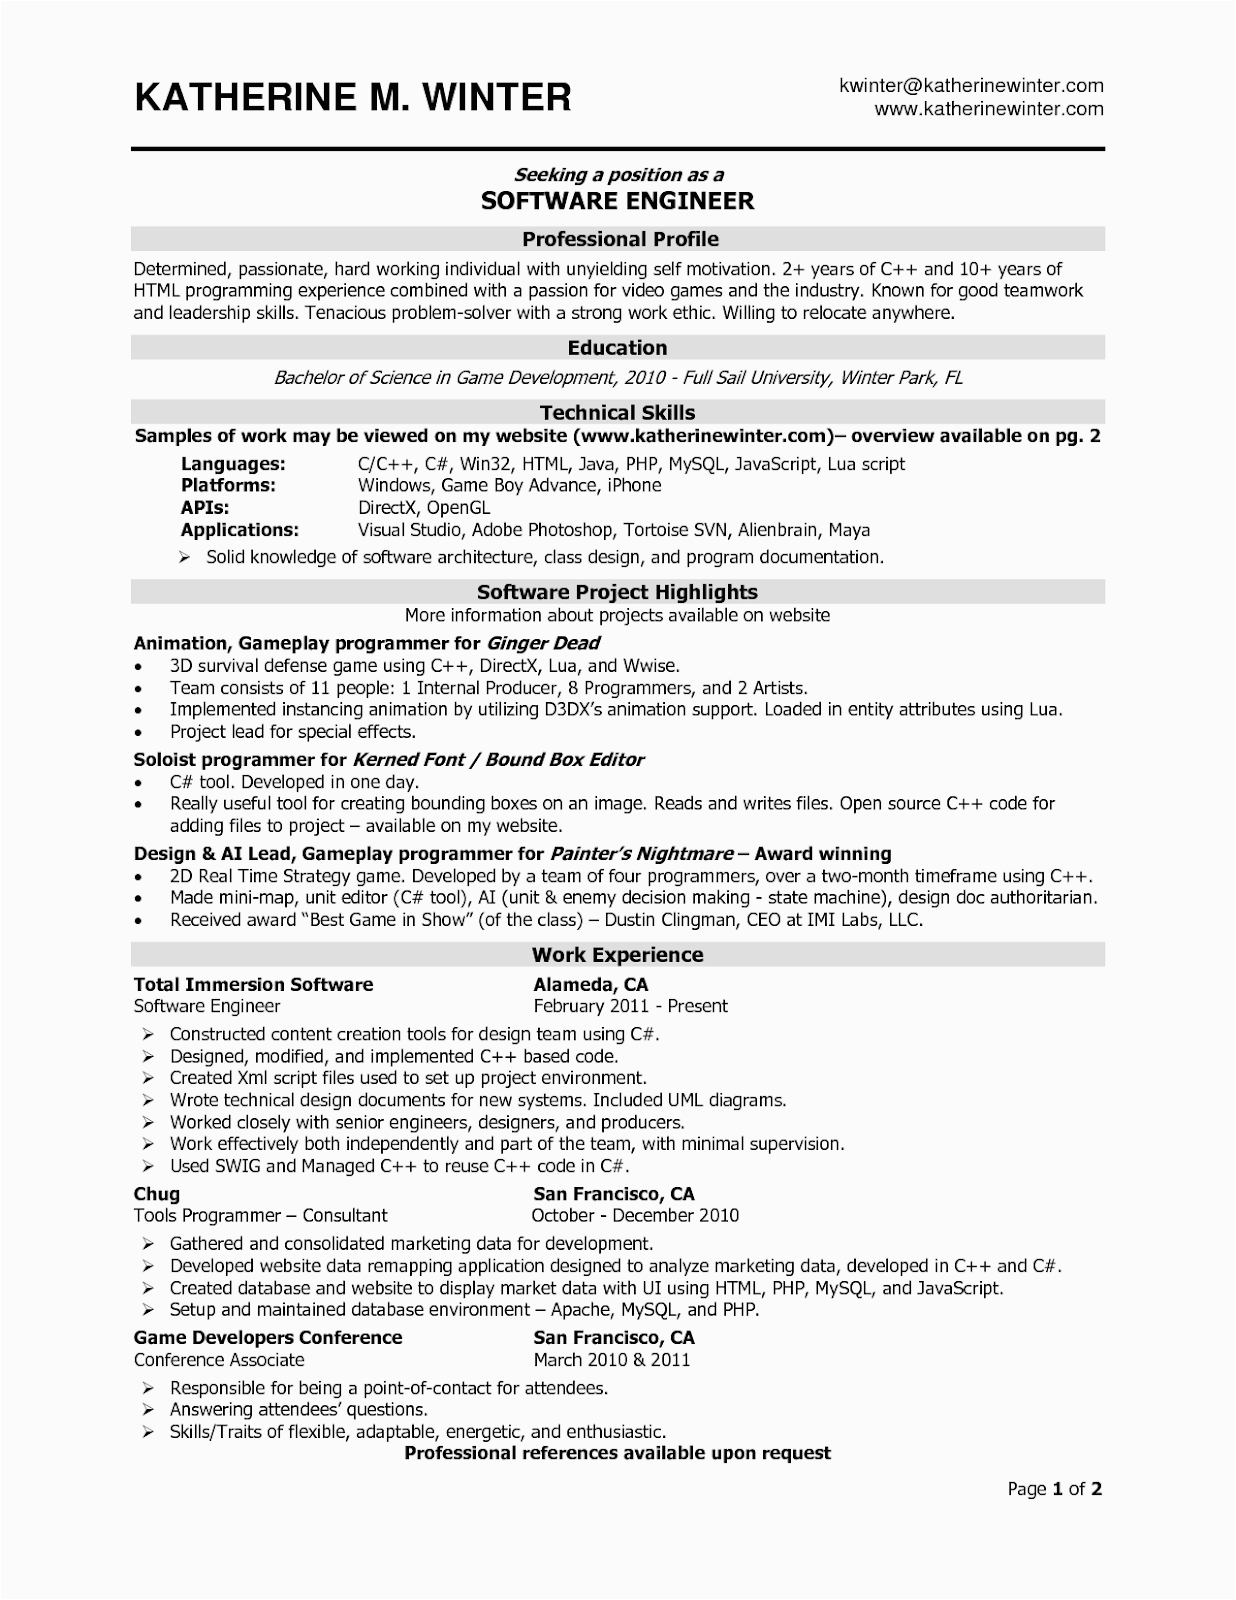 Sample Resume format for Experienced software Engineer software Engineer Resume Samples